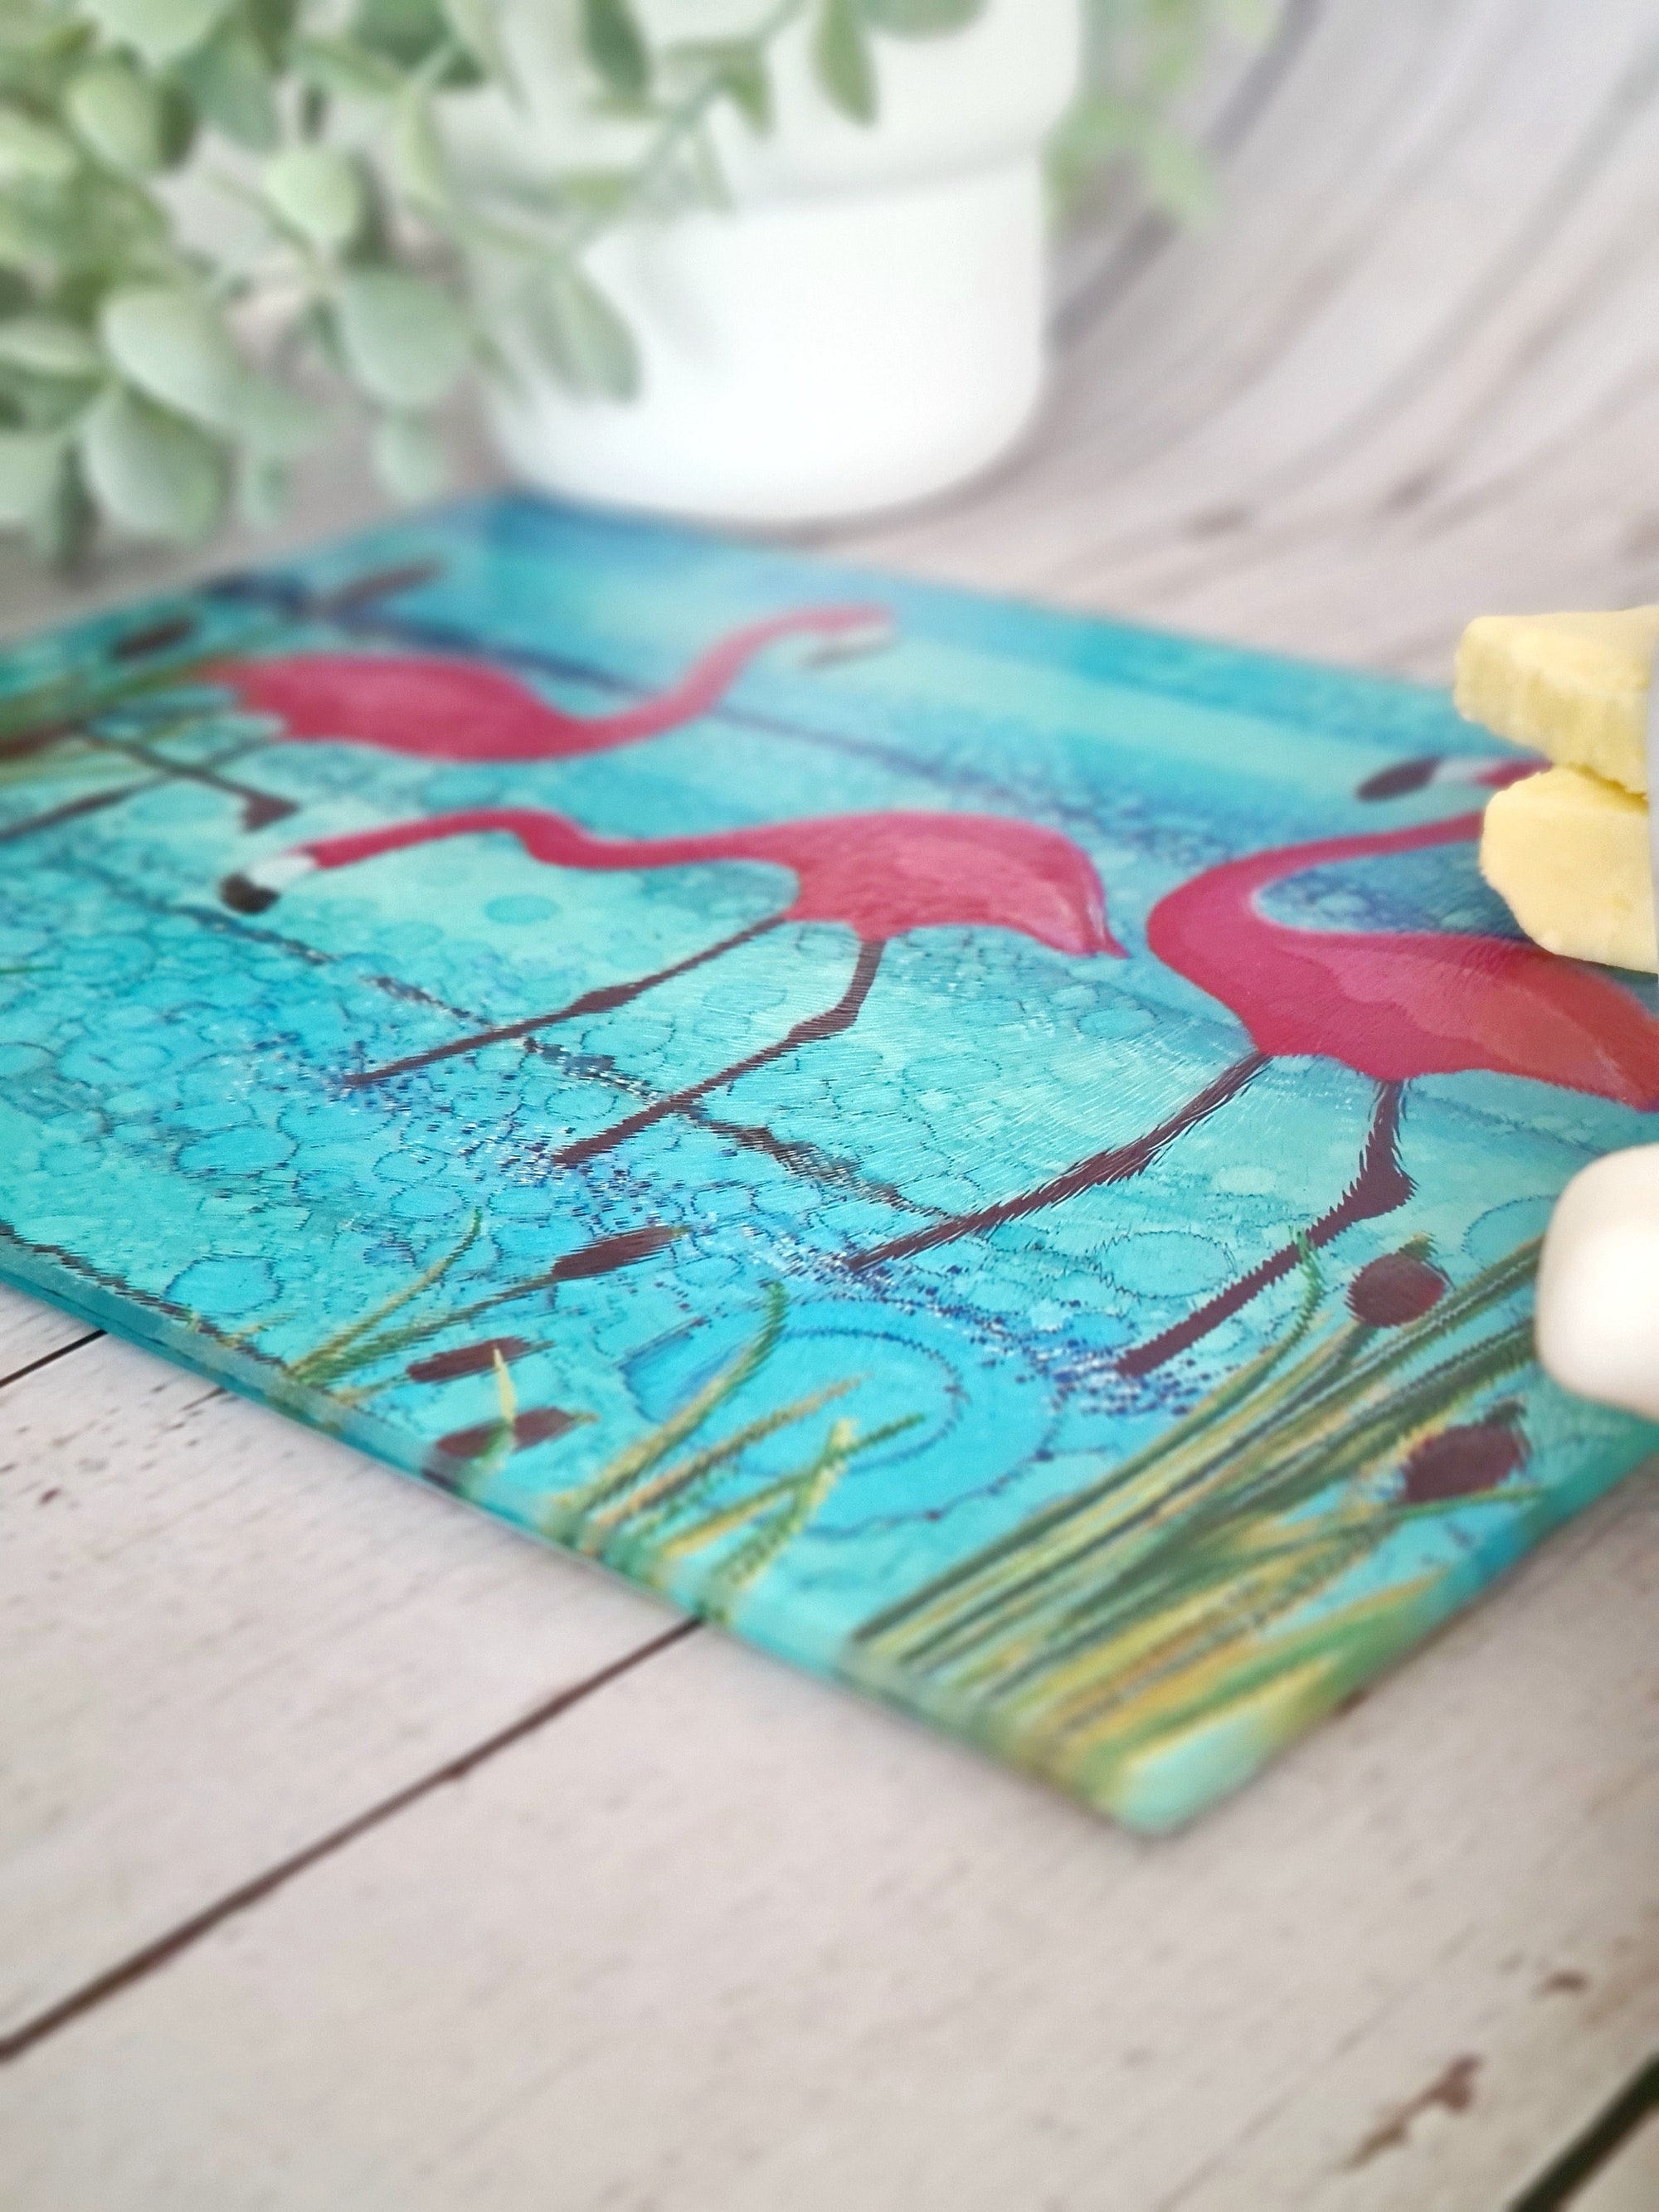 Flamingo Tempered Glass Chopping Board, Glass Placemats, Moonlight Animal, pink flamingo